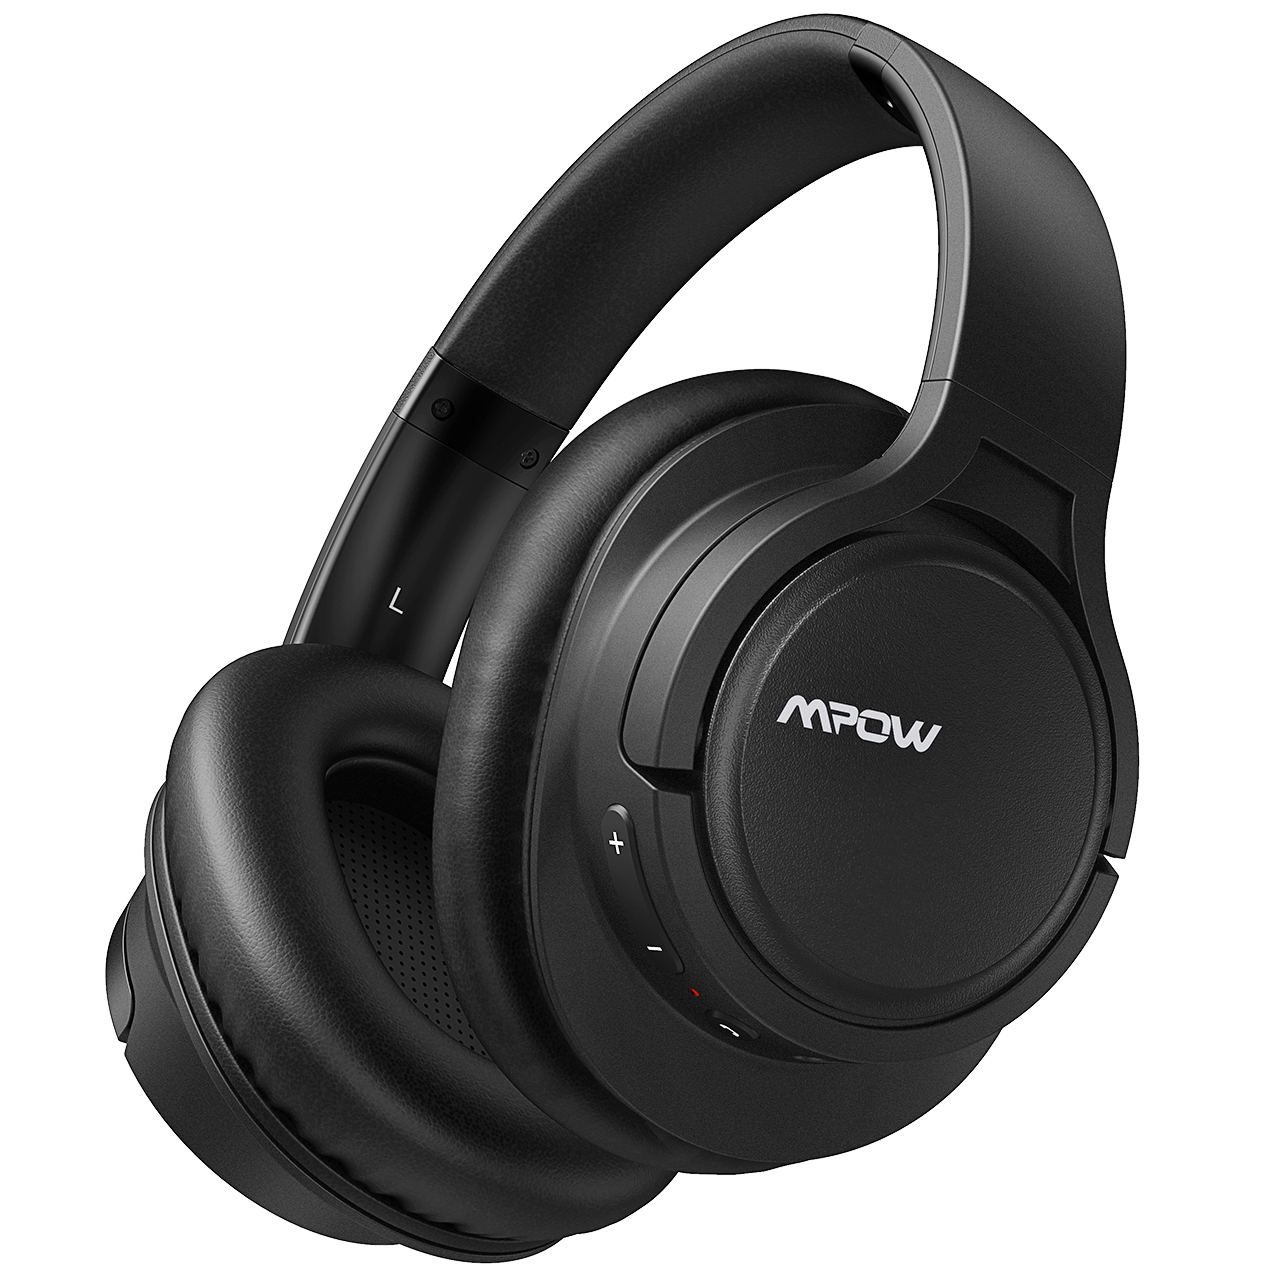 MPOW H7 Pro Over-ear Bluetooth 5.0 Headphones, Wireless Headphones Supports Rapid Charge, Bluetooth Headsets, Hi-Fi Stereo Sounds Black - image 2 of 9